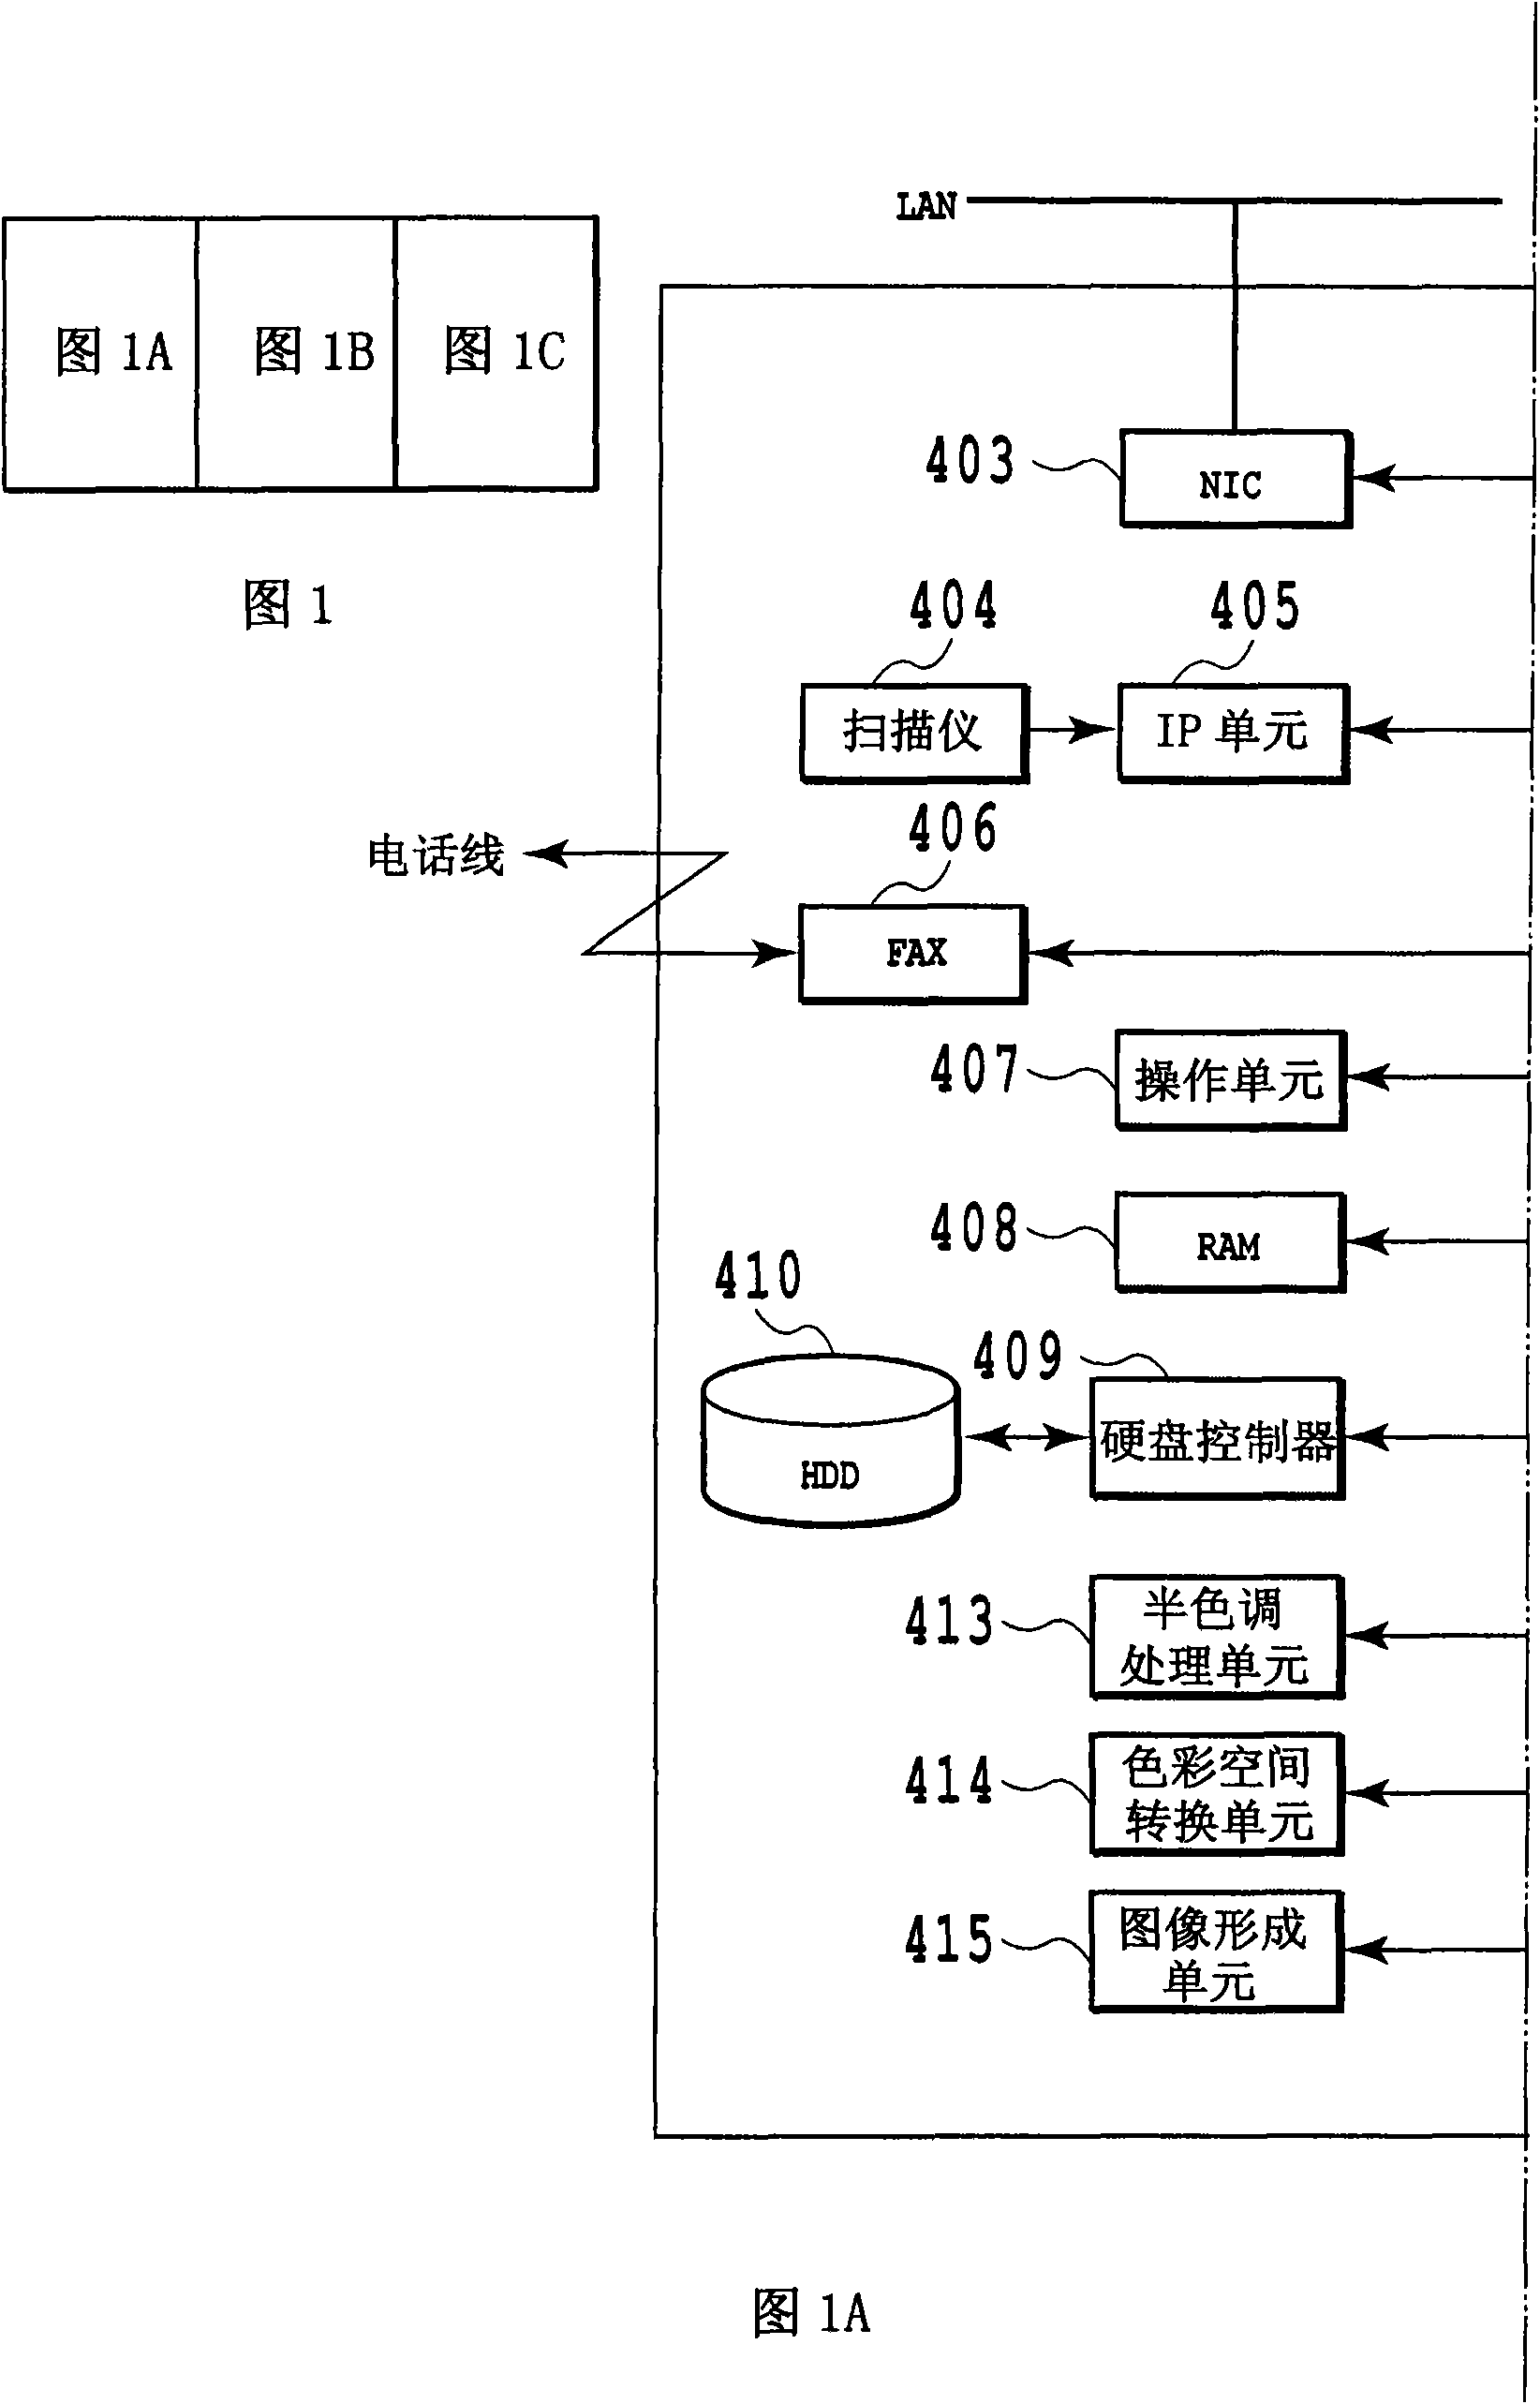 Apparatus and method for forming color image